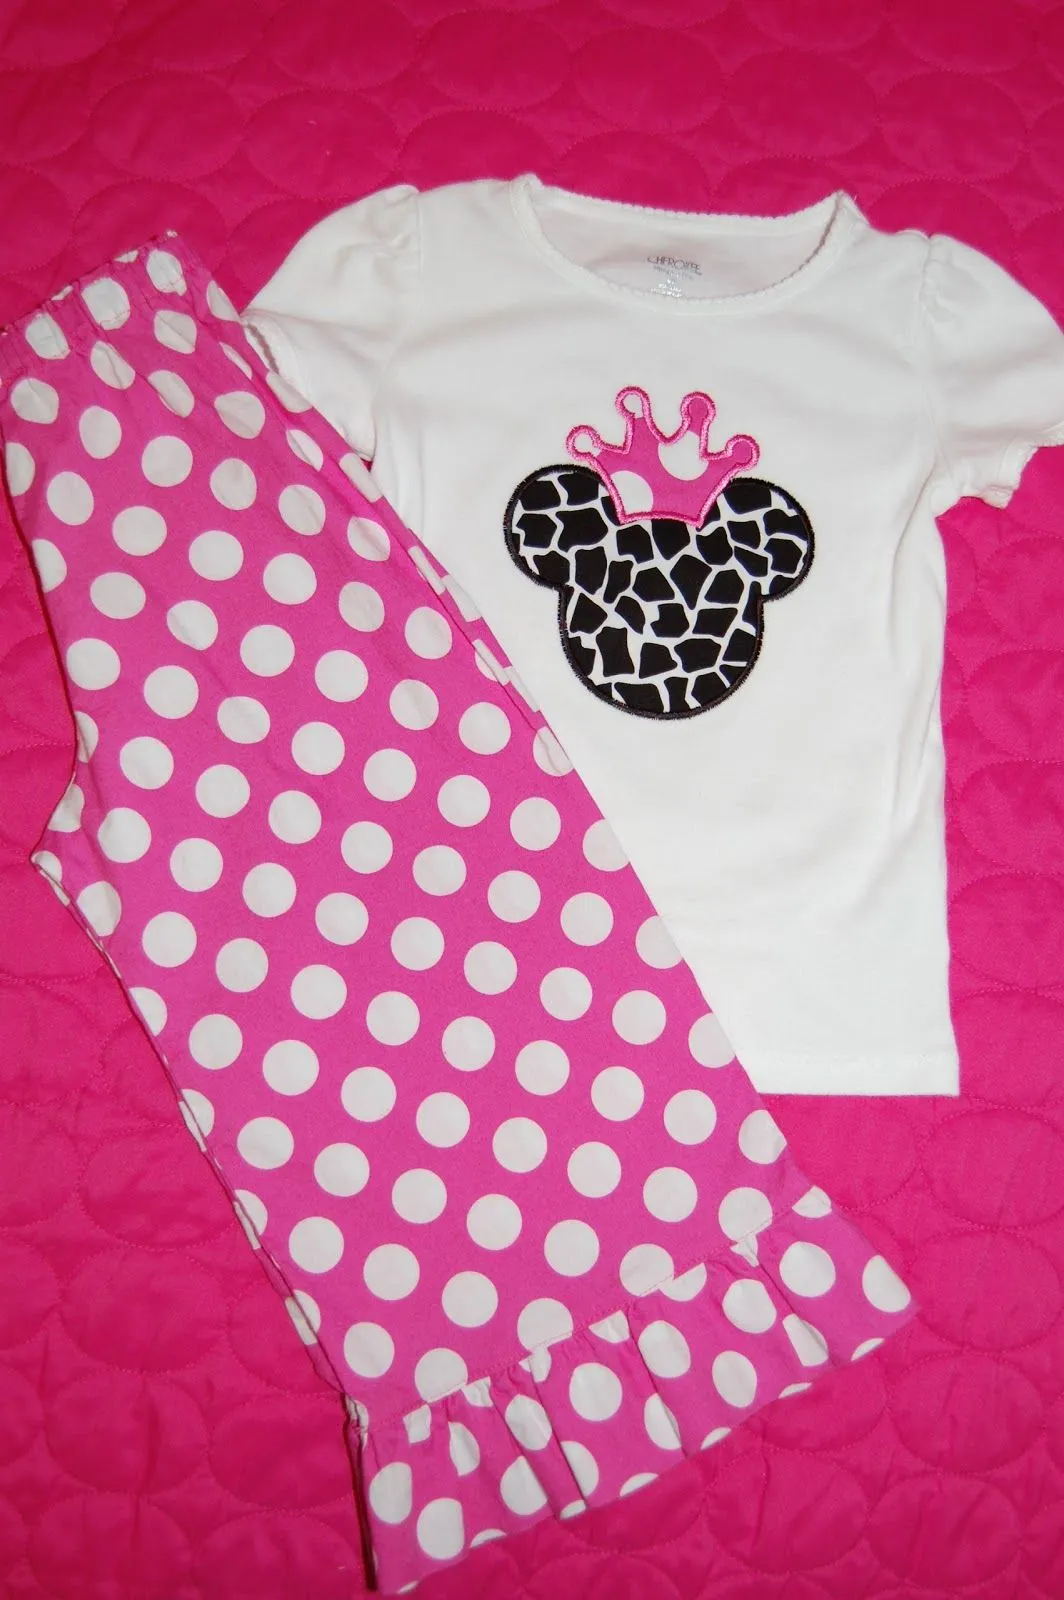 or zebra print Minnie Mouse with crown applique!